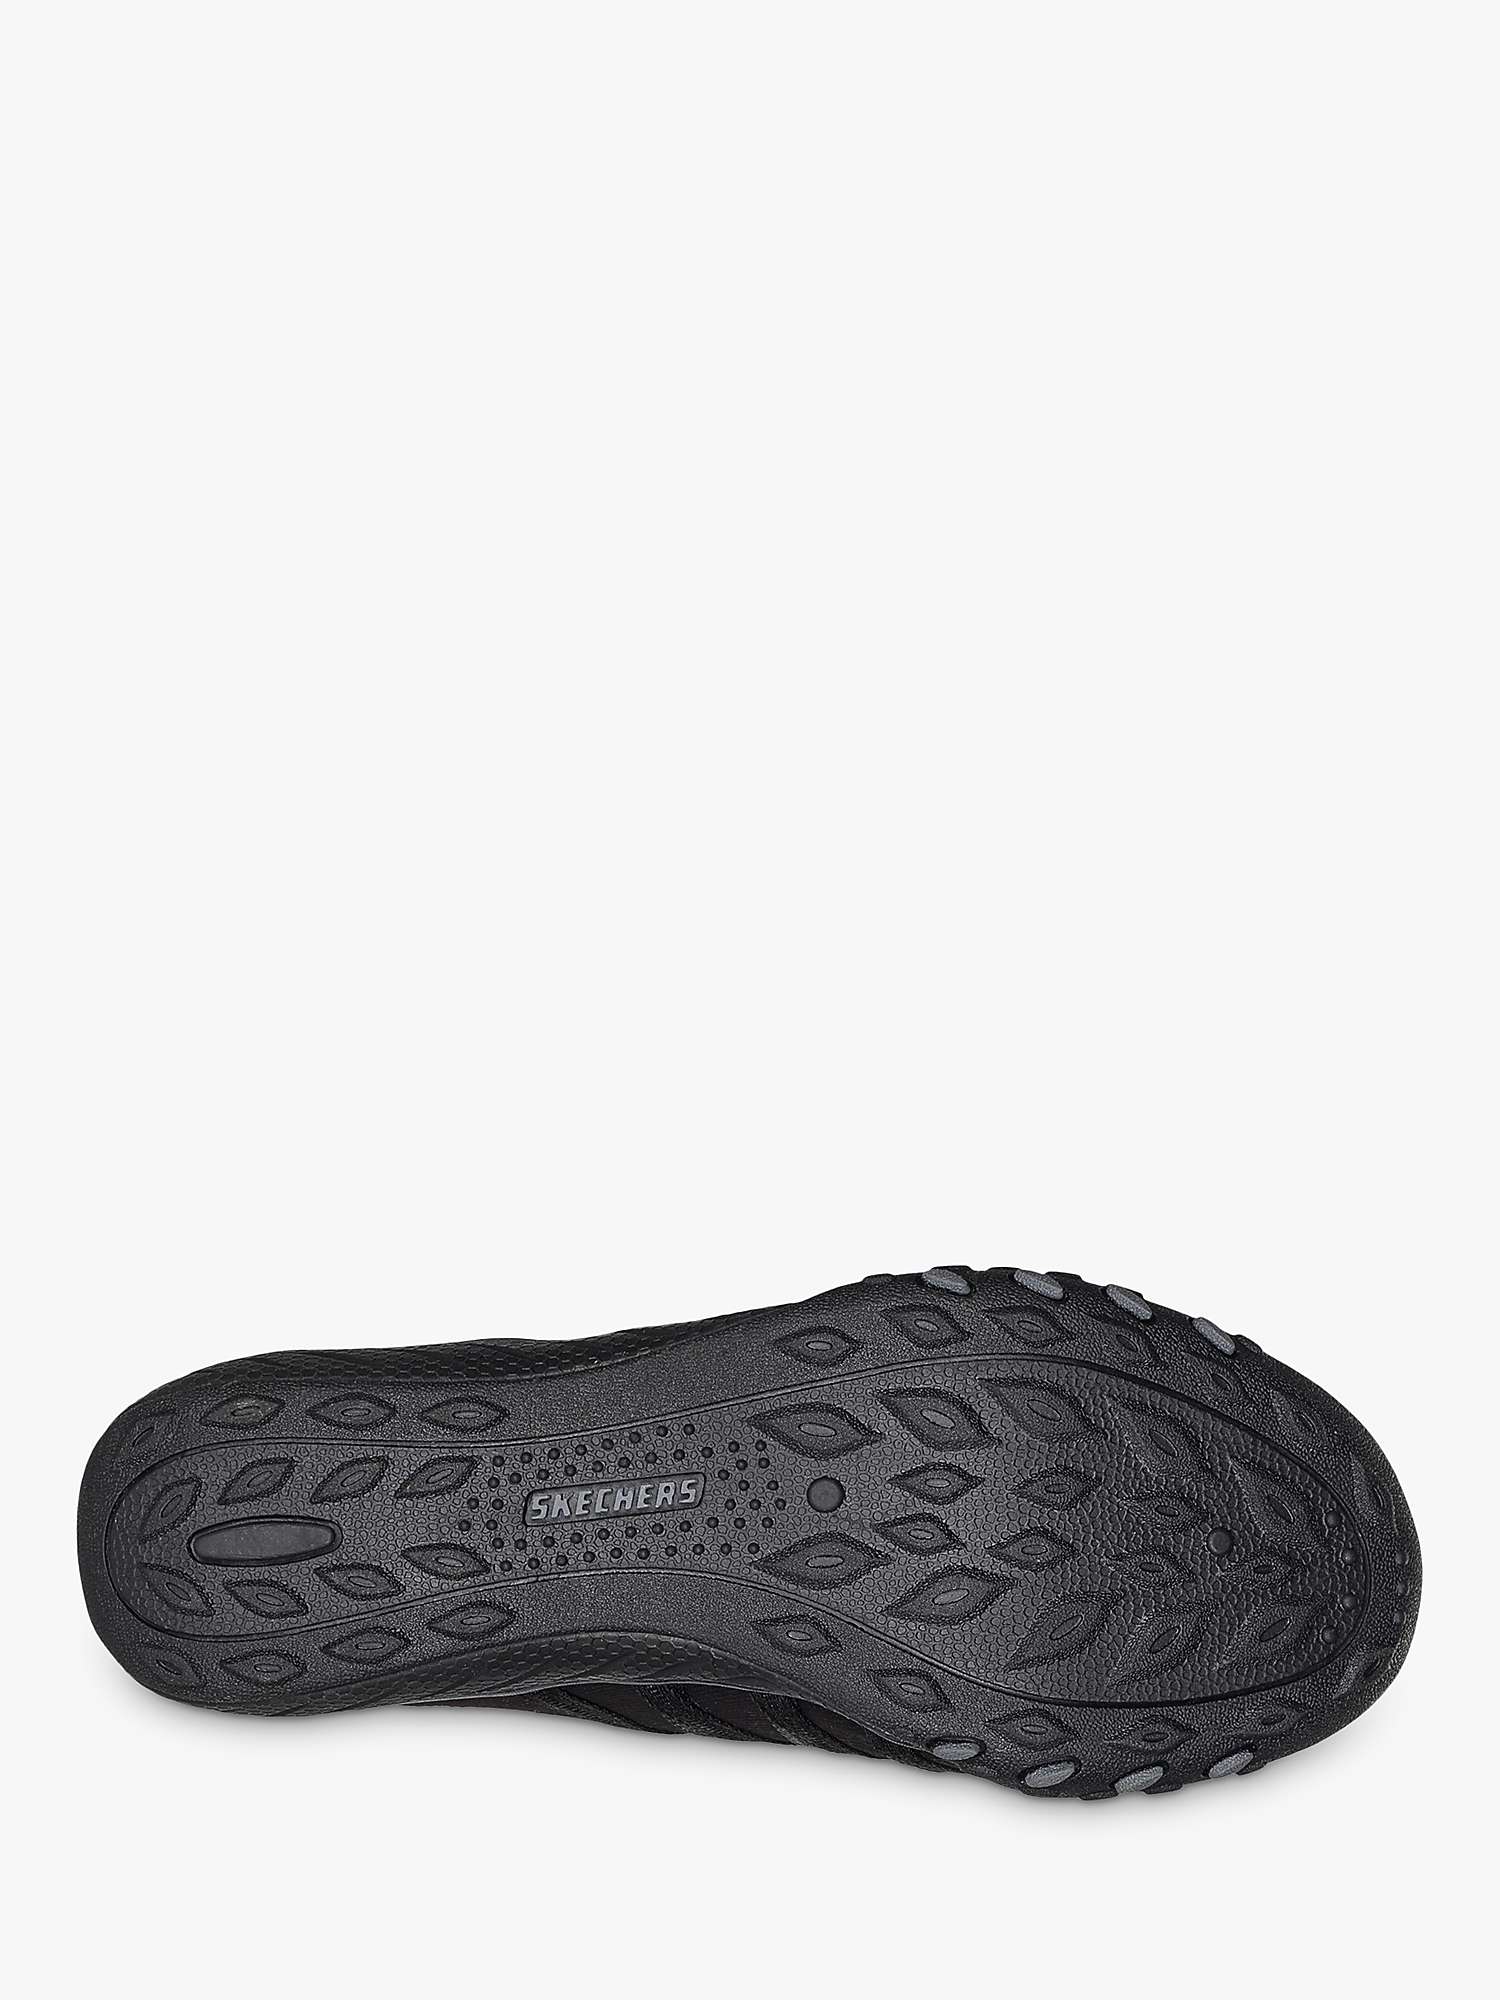 Skechers Breathe Easy Roll With Me Trainers, Black at John Lewis & Partners